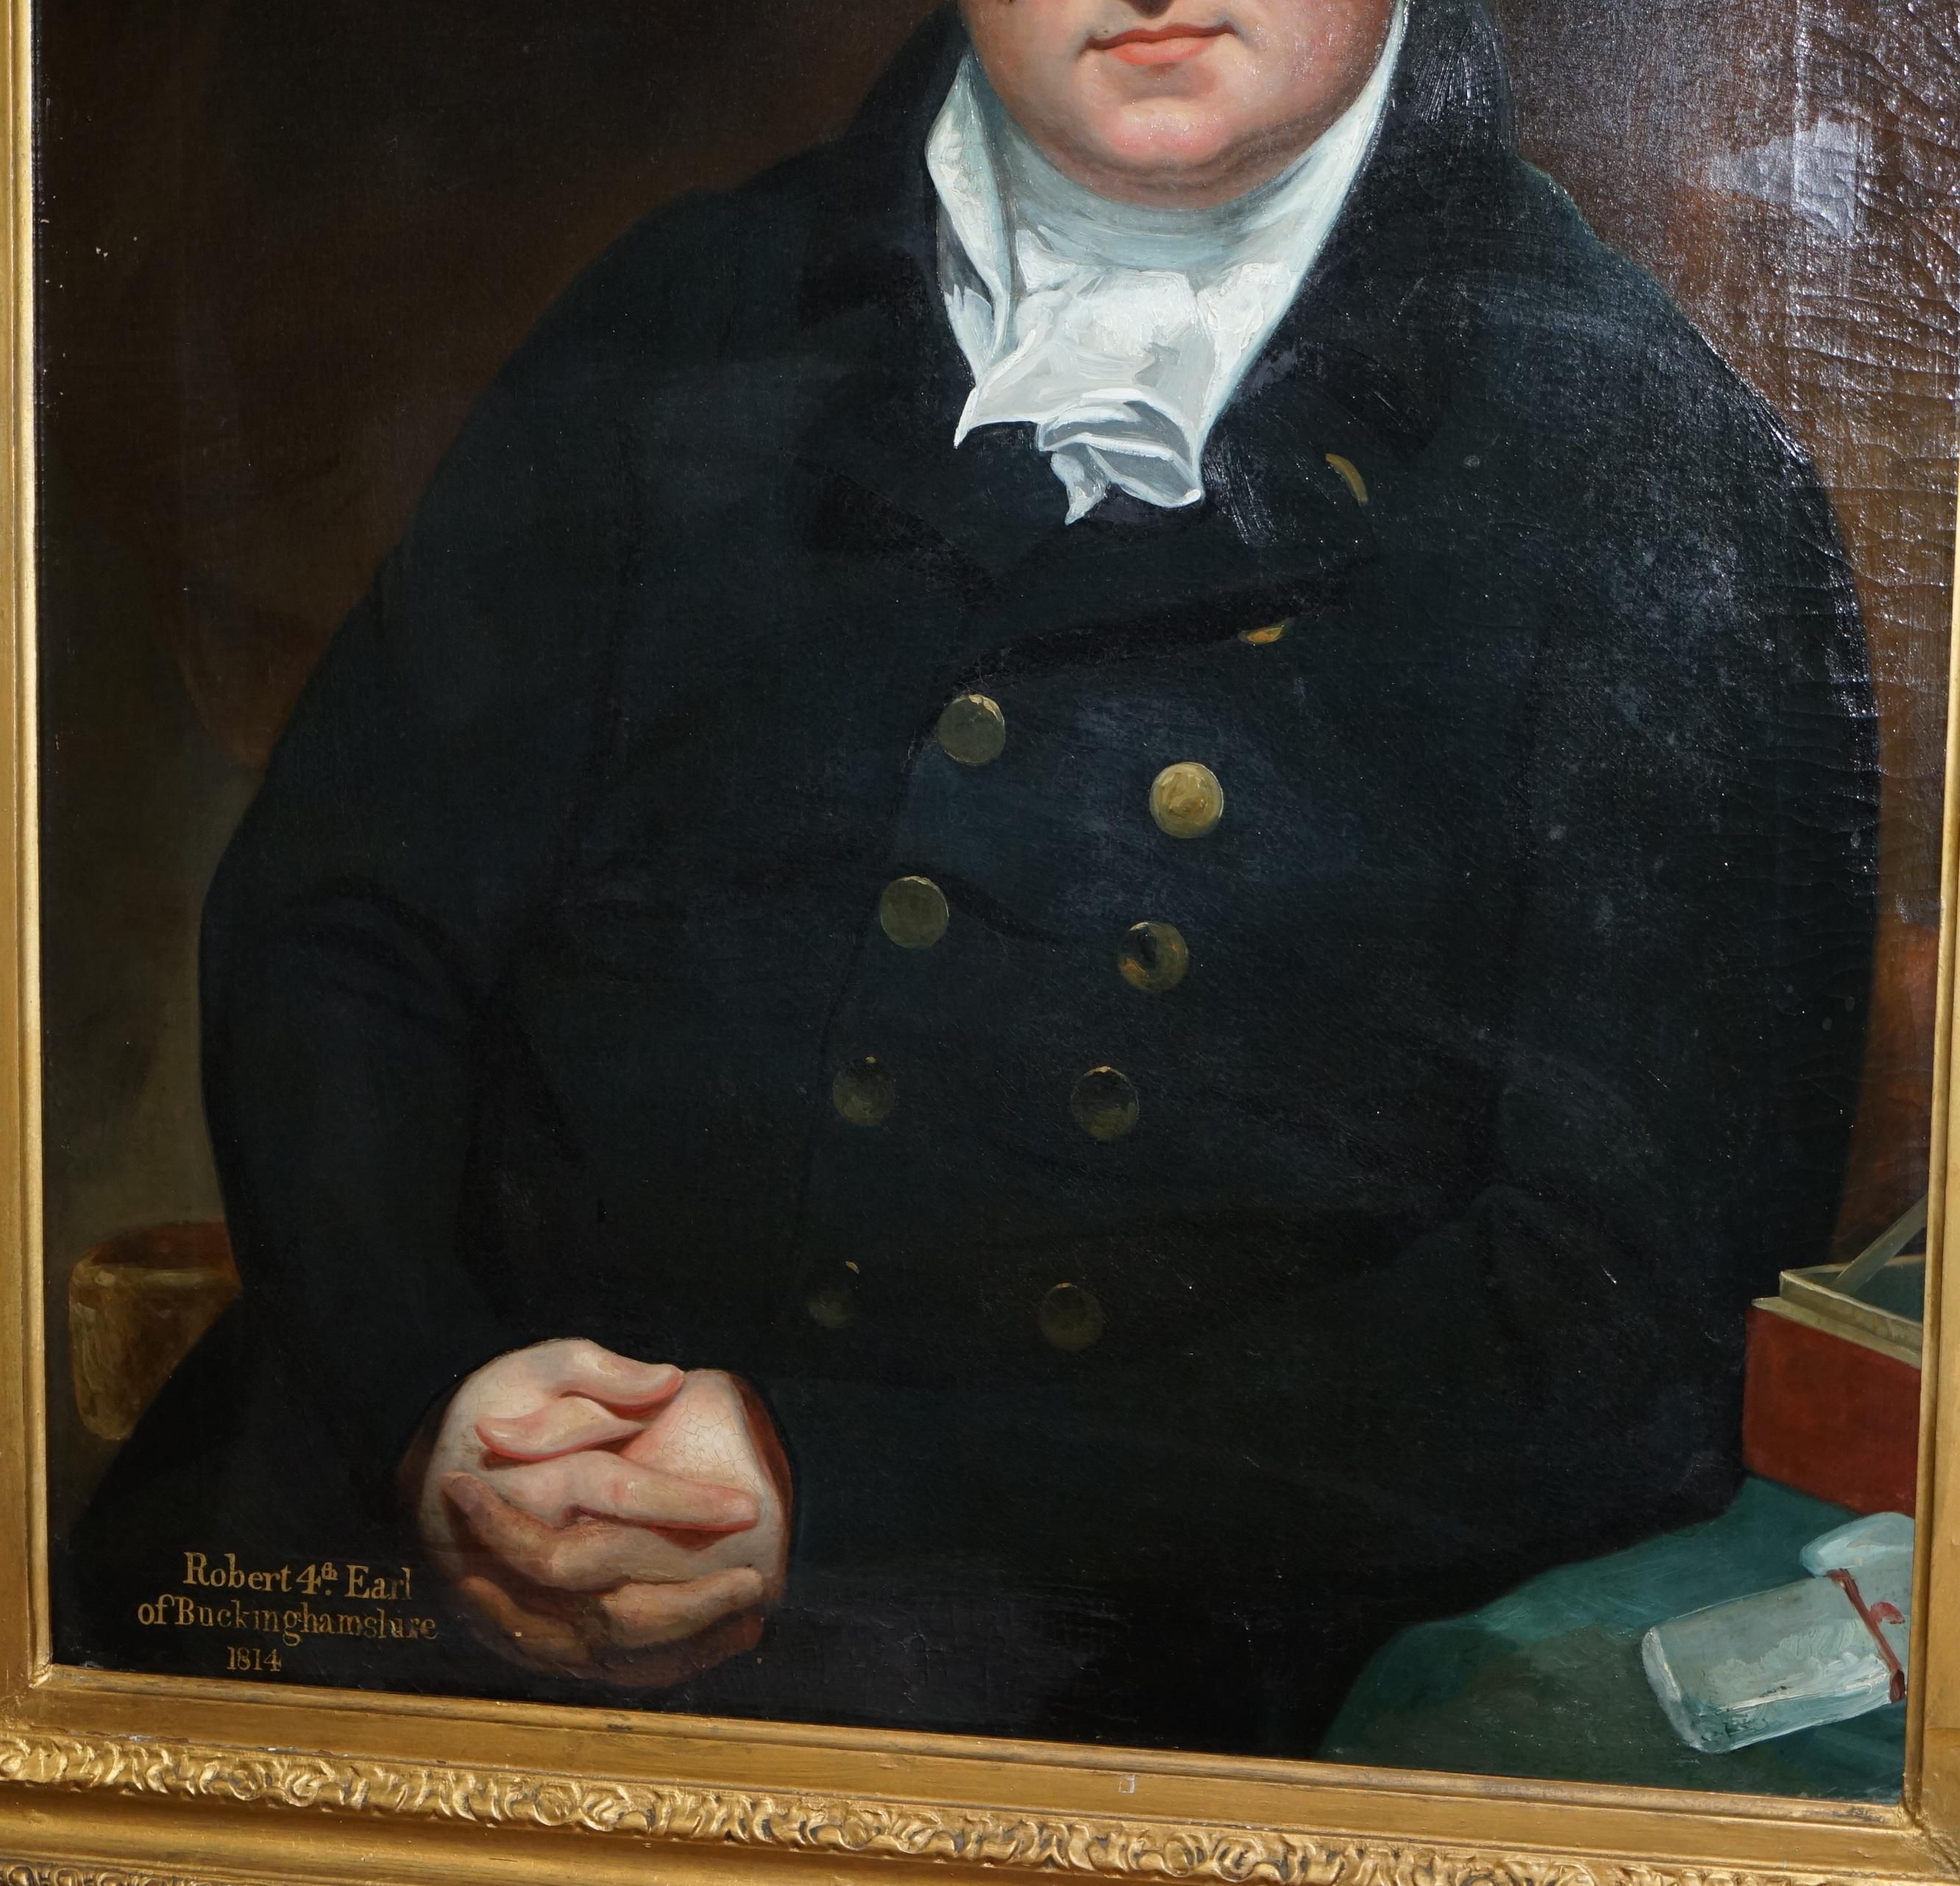 Hand-Crafted 1814 SIR WILLIAM BEECHEY CIRCLE OIL PAINTING ROBERT 4TH EARL OF BUCKINGHAMSHiRE For Sale